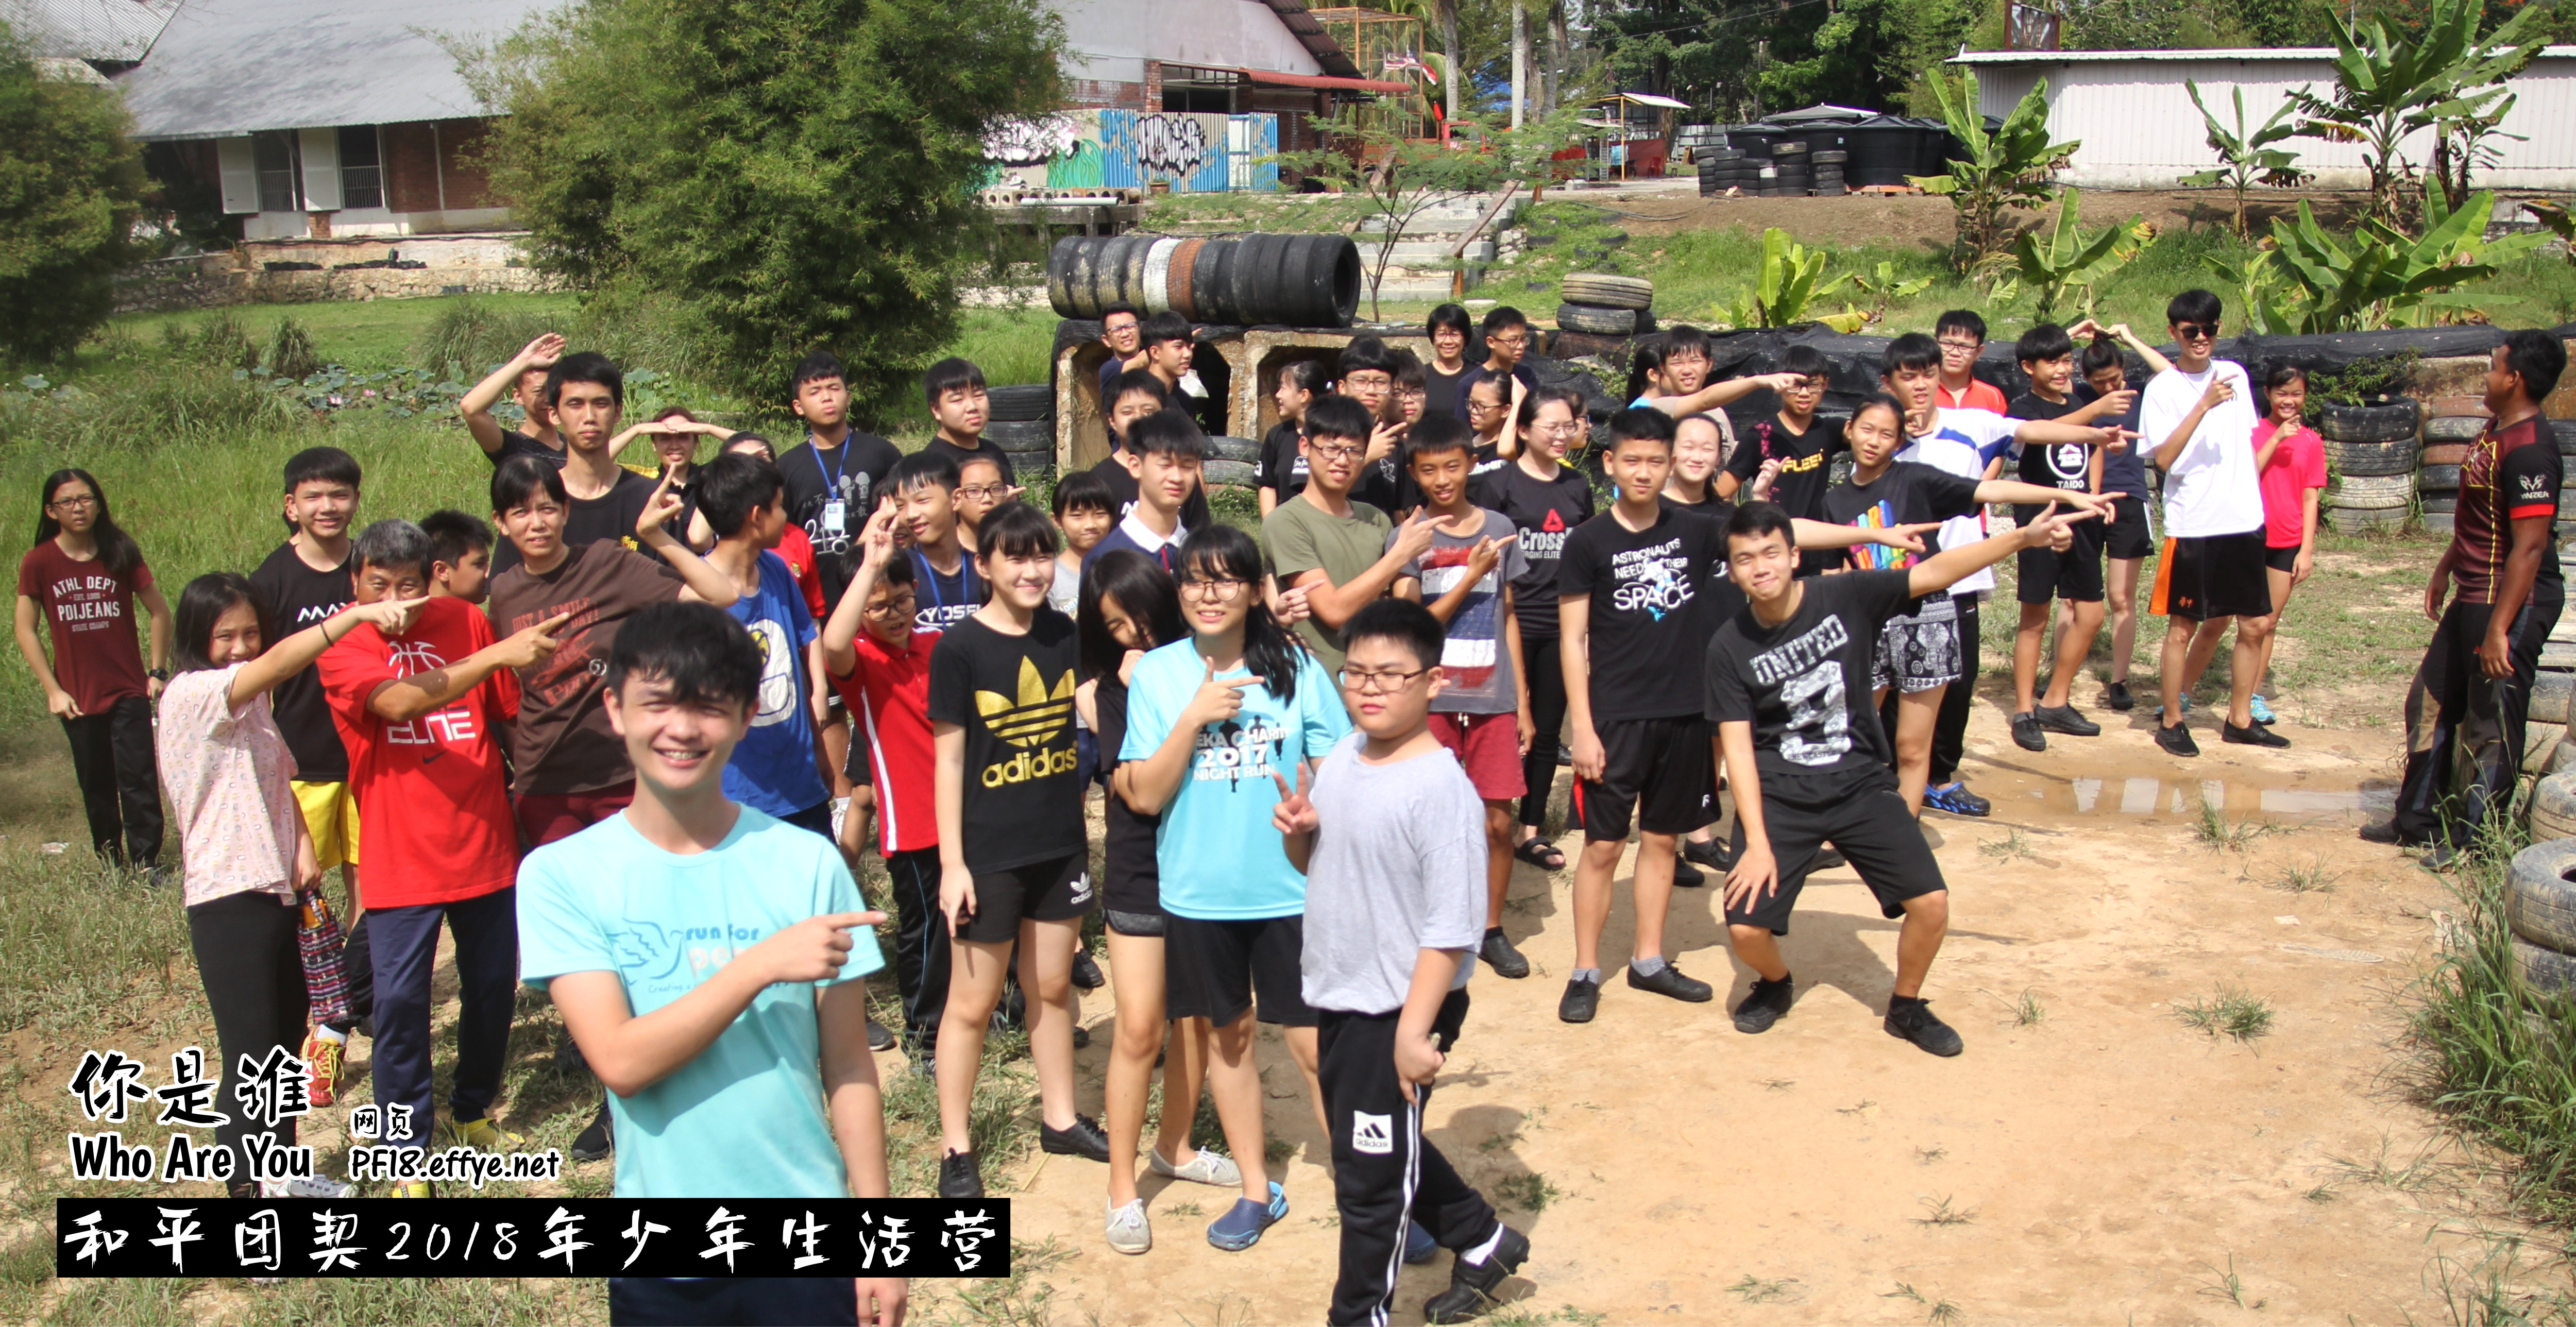 Peace Fellowship Youth Camp 2018 Who Are You 和平团契 2018 年少年生活营 你是谁 A002-024